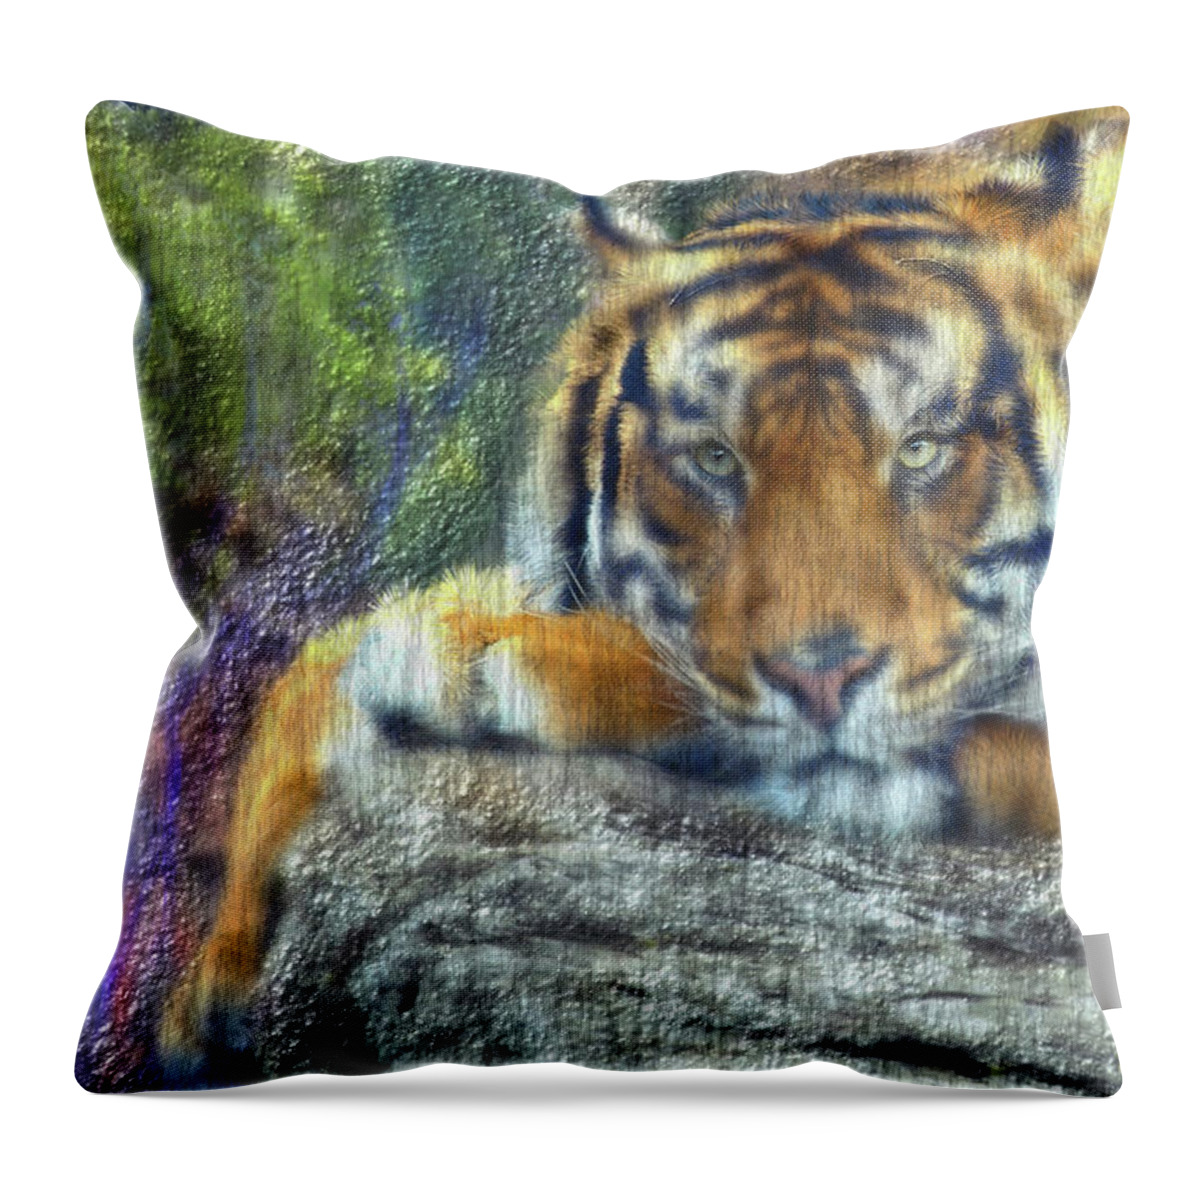 Tiger Throw Pillow featuring the digital art Tigerland by Michael Cleere